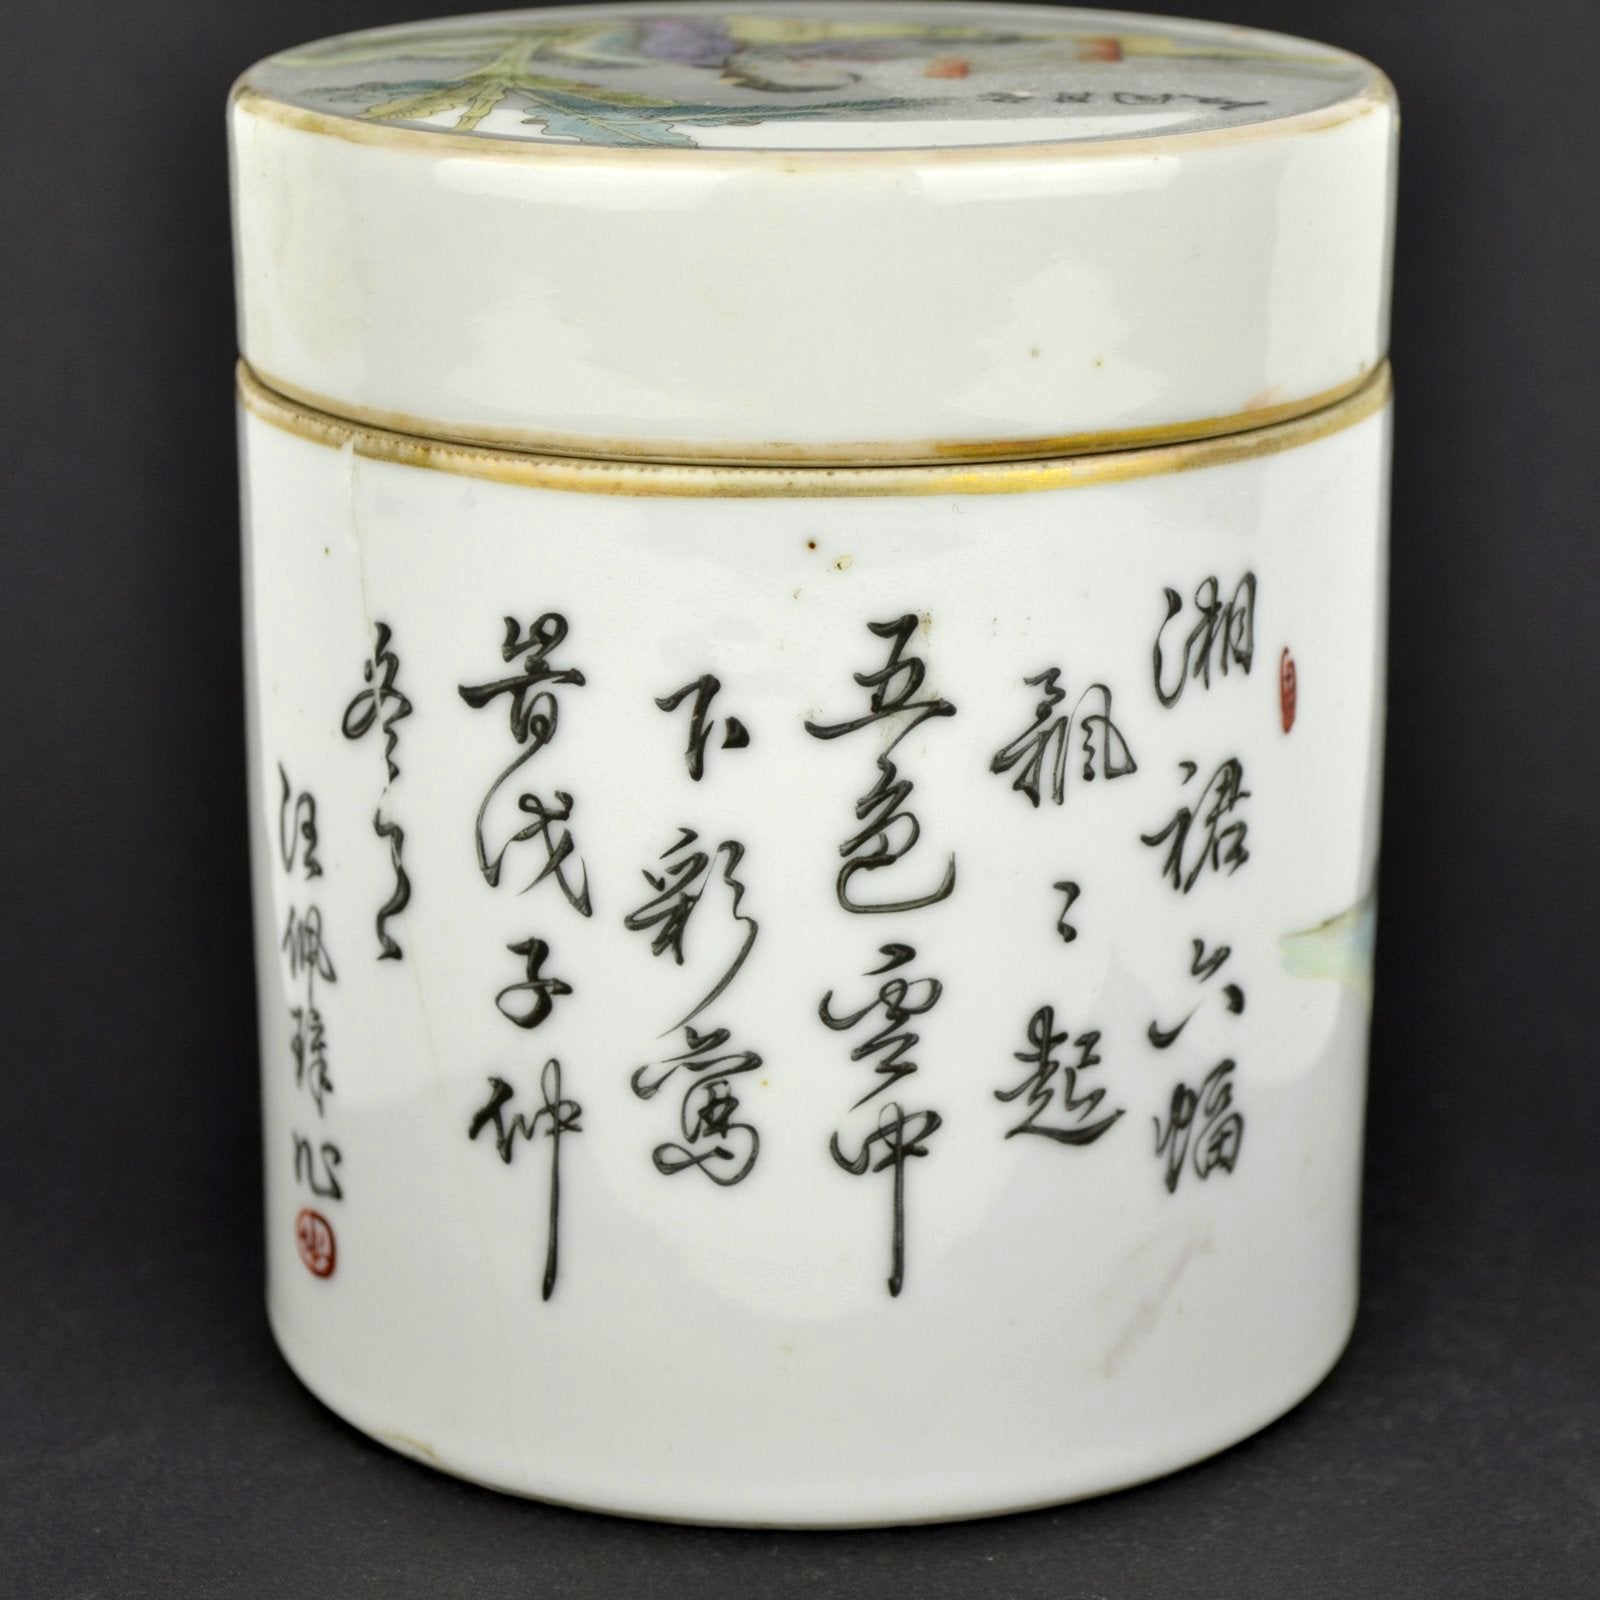 Republic Period Lidded Container